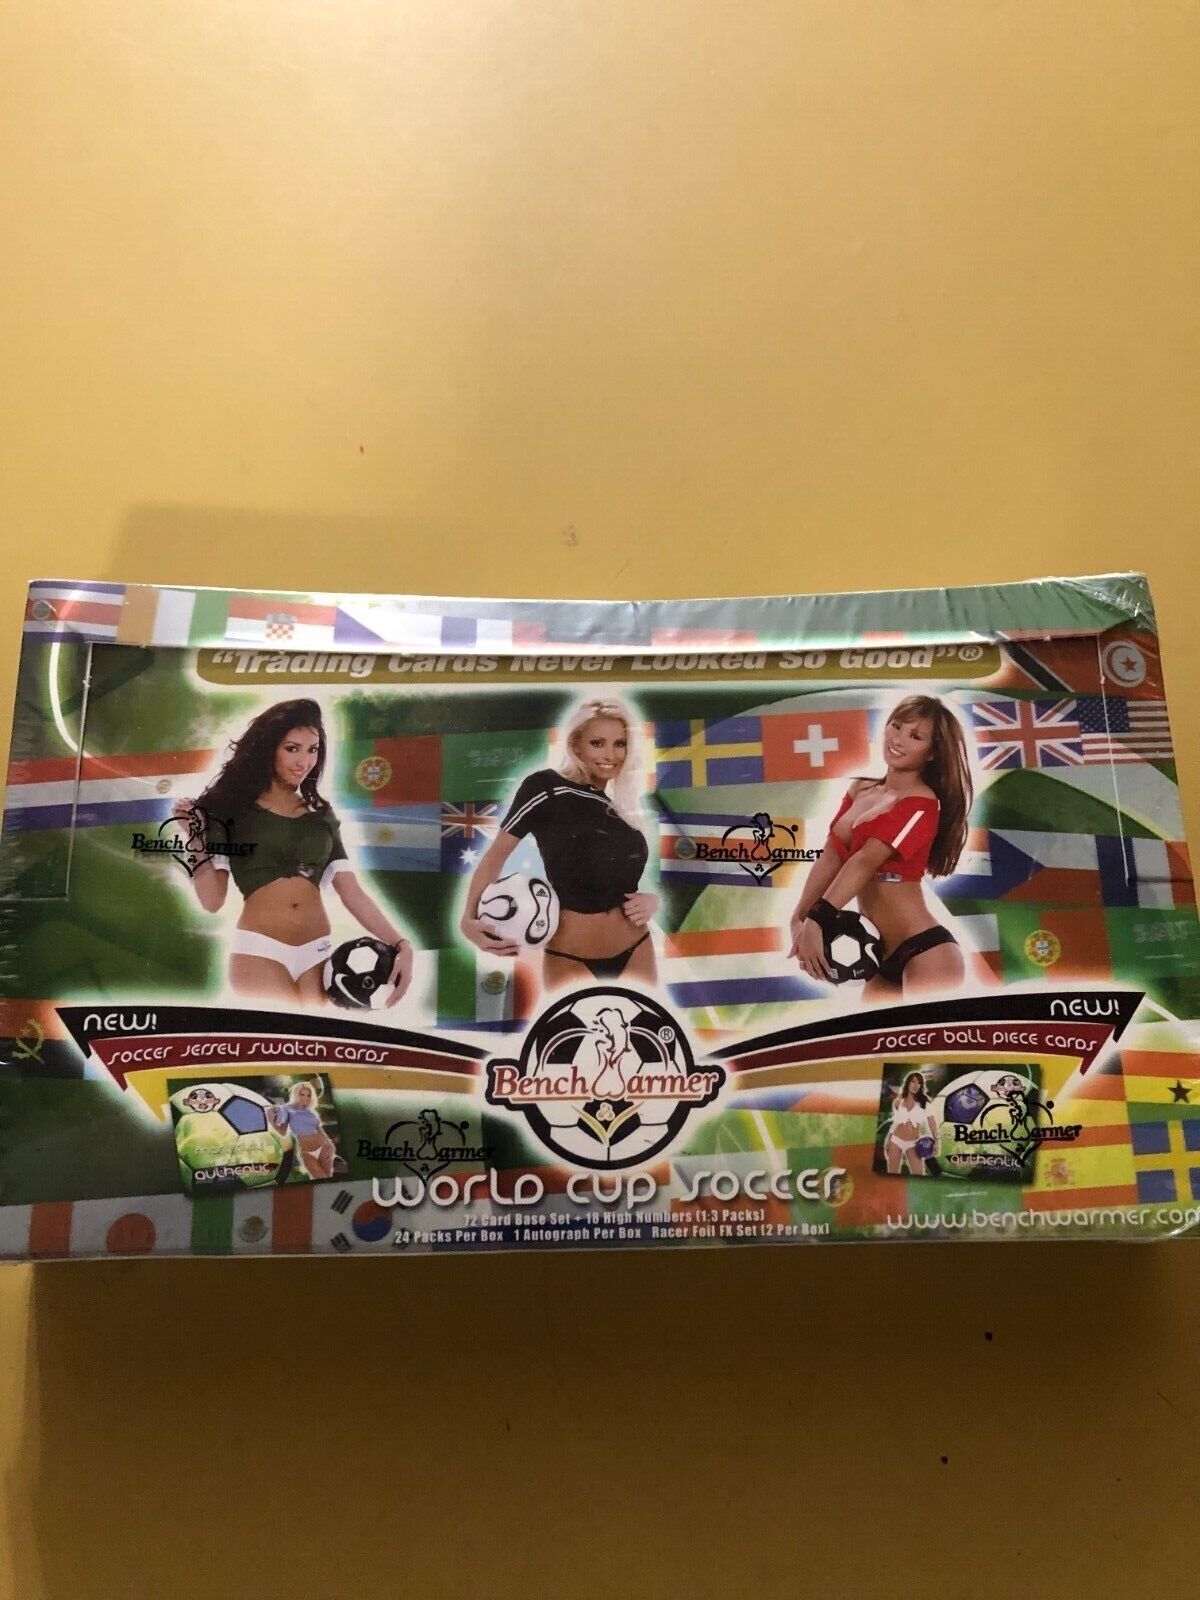 2006 World Cup Soccer Benchwarmer Cards-New, Factory Sealed Box